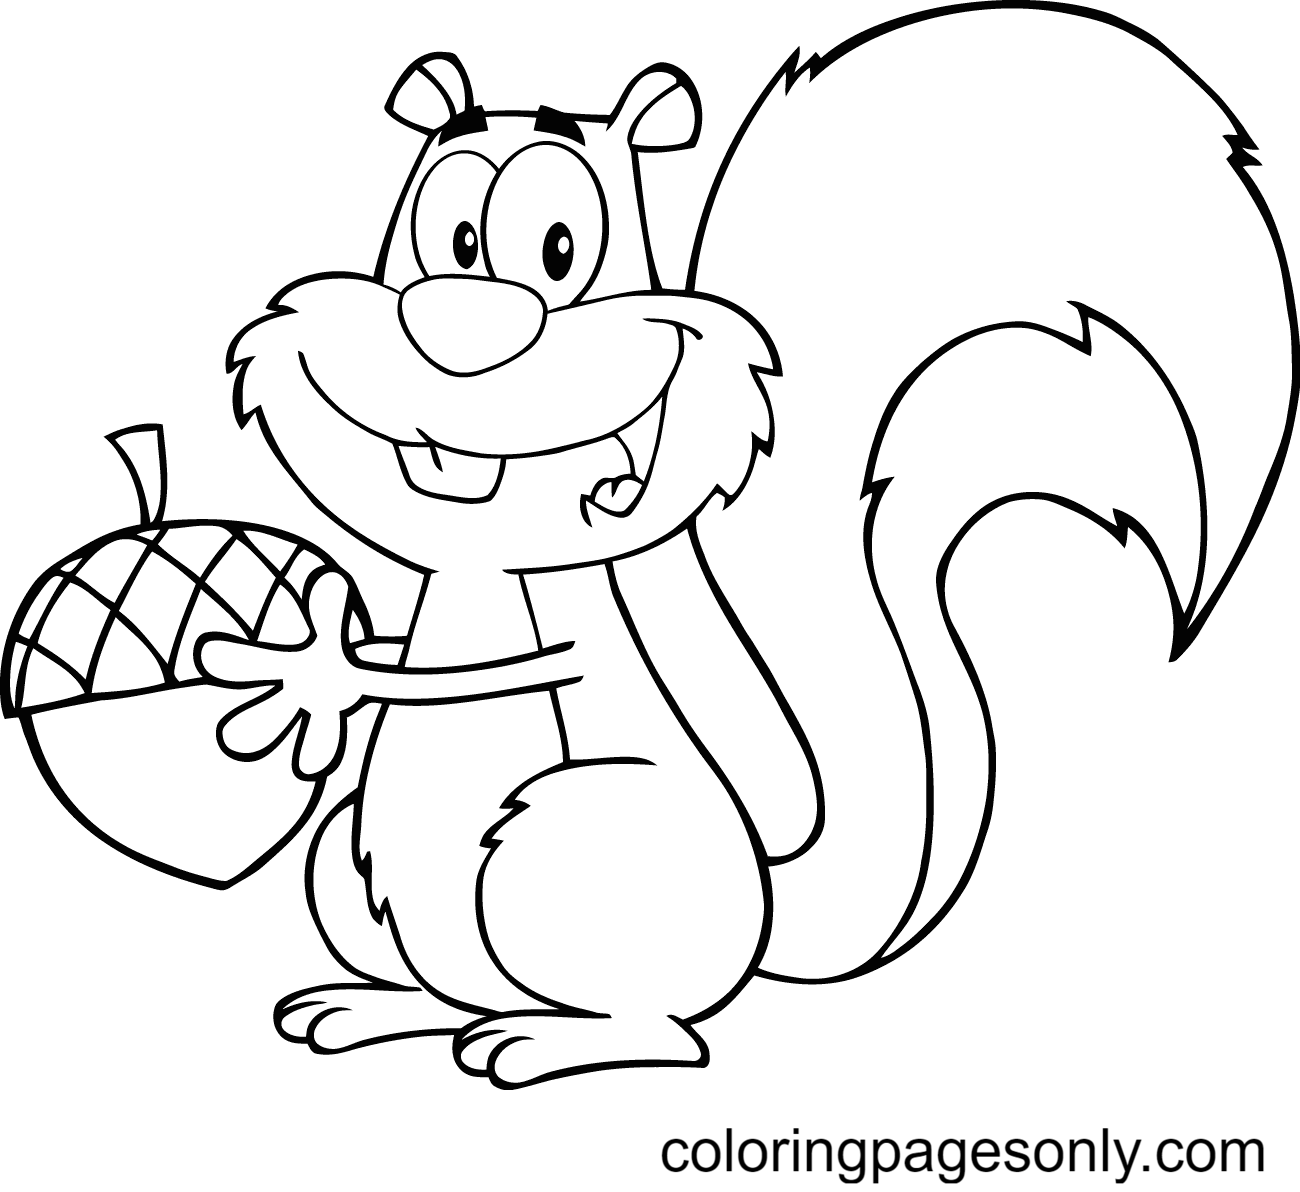 Cartoon Squirrel Holding An Acorn Coloring Pages